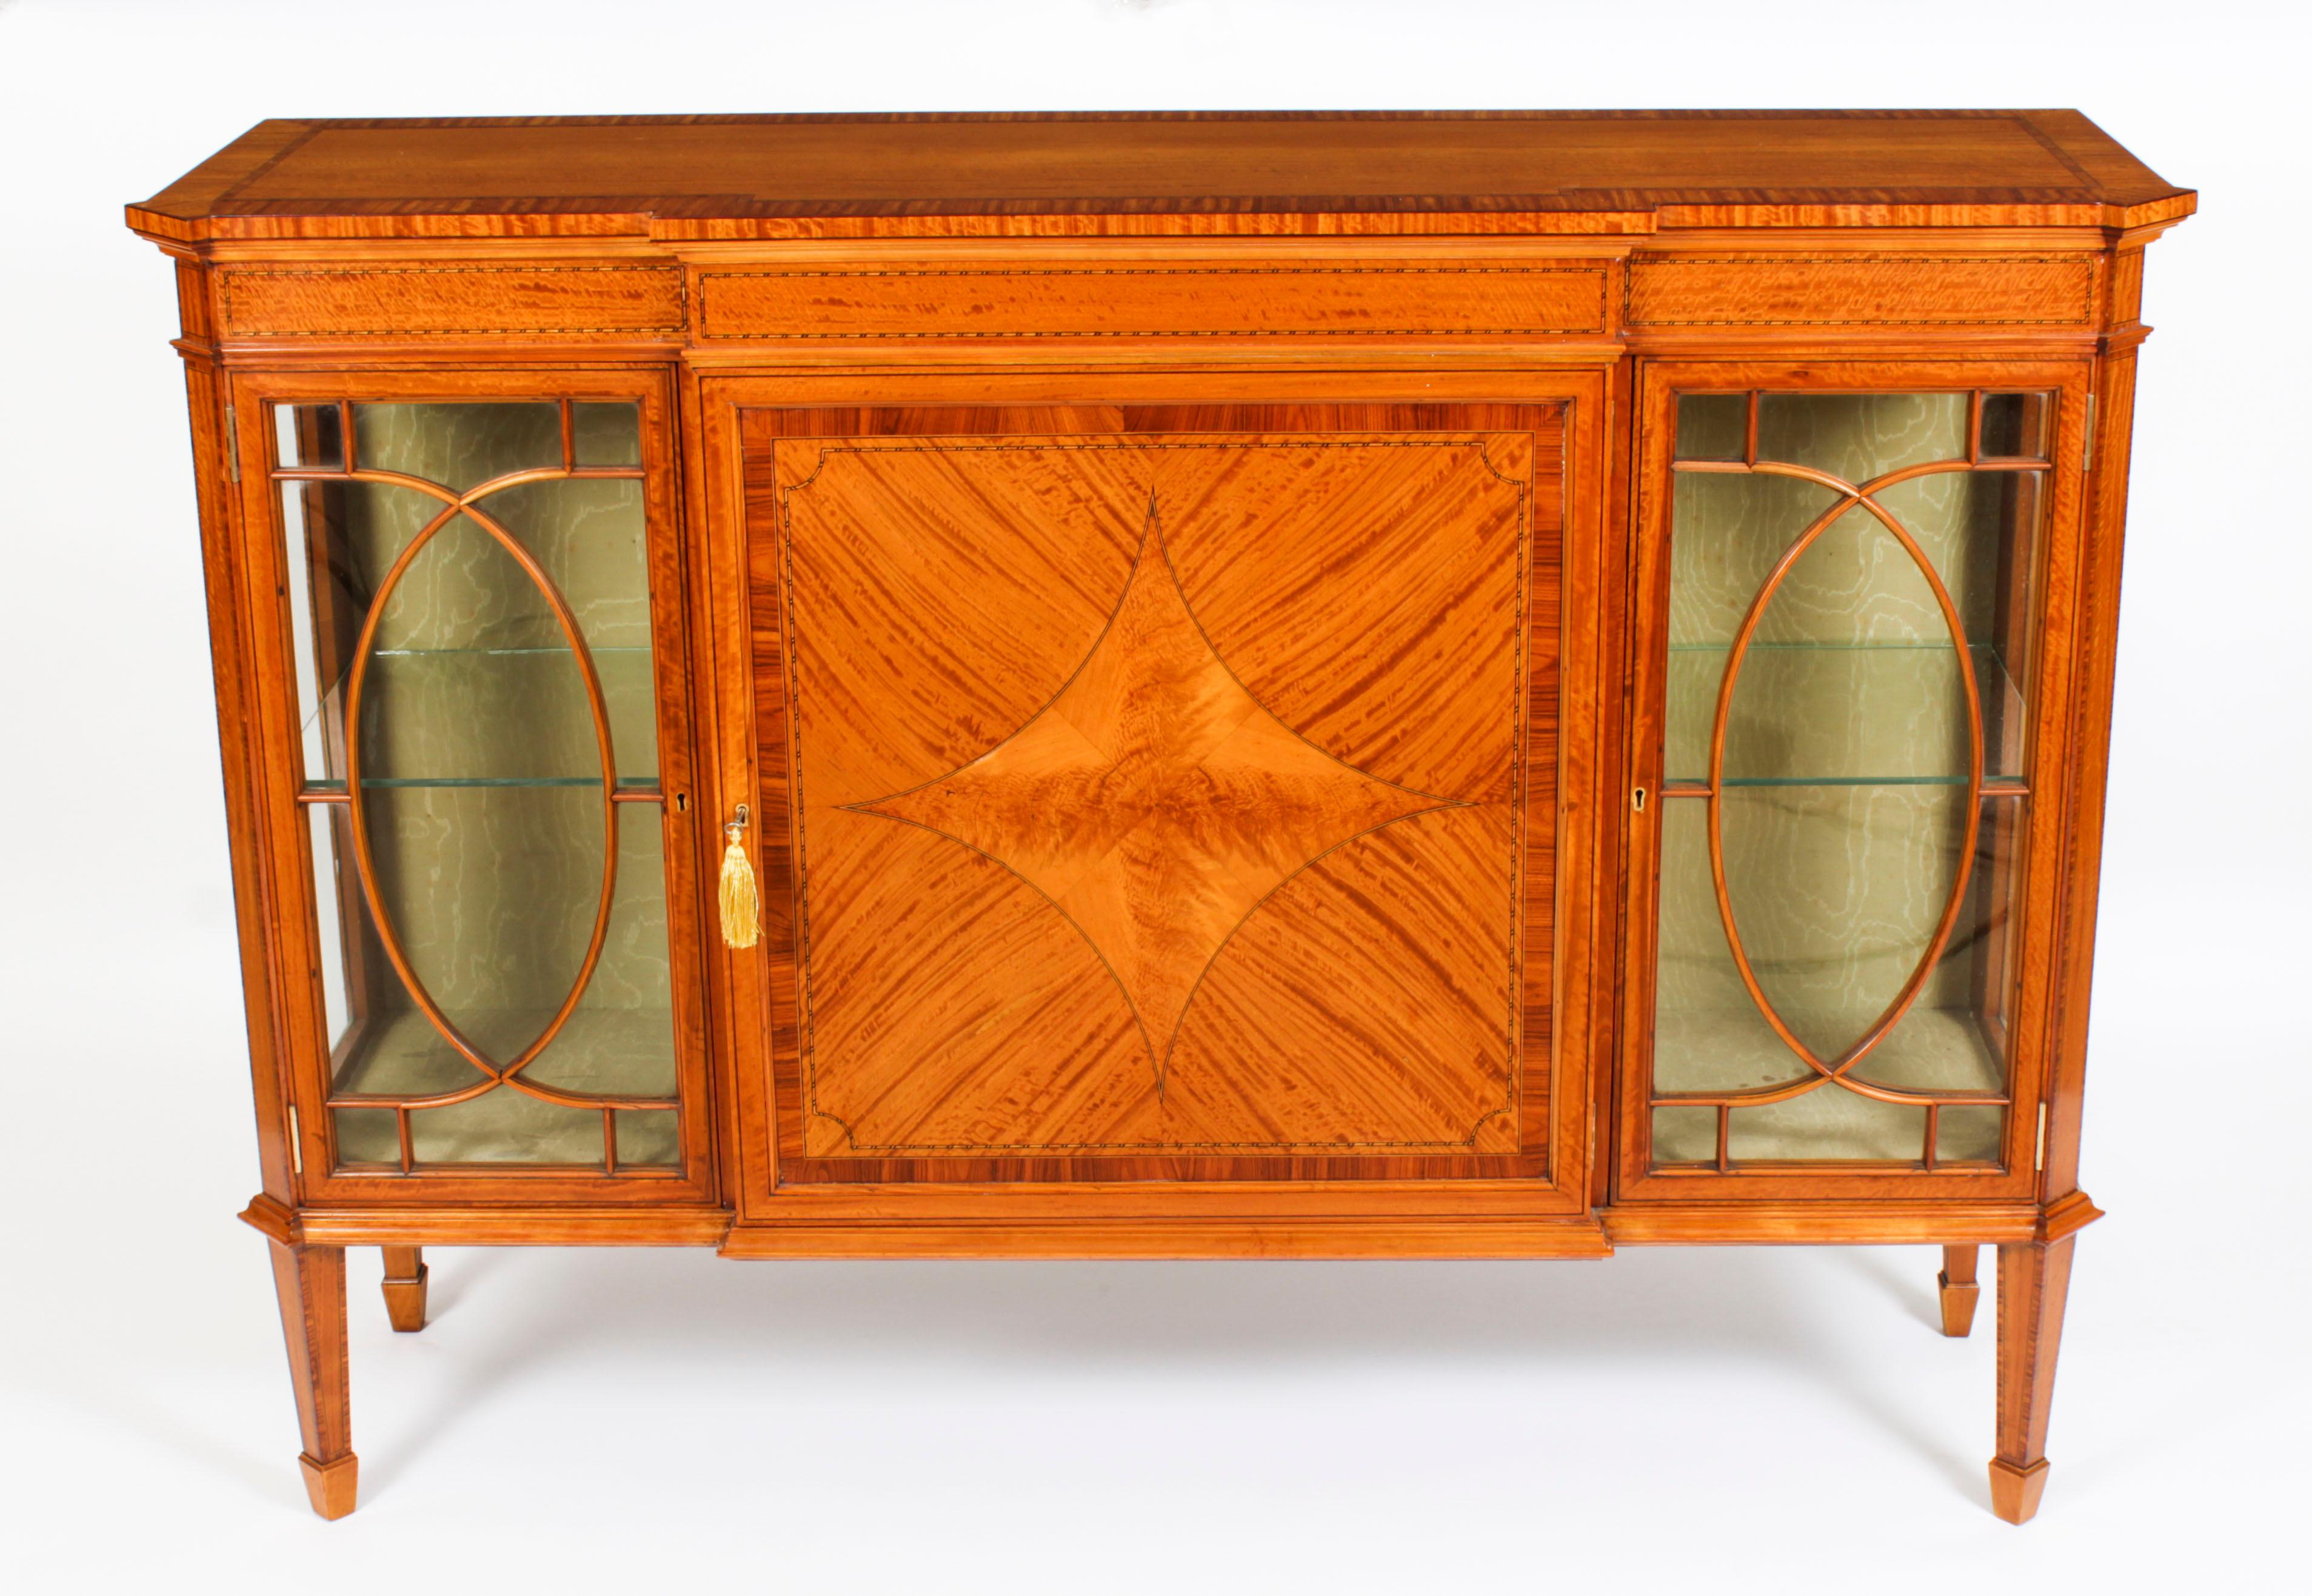 This is a superb antique late Victorian satinwood breakftont display cabinet , circa 1880 in date.

Oozing sophistication and charm, this cabinet is the absolute epitome of Victorian high society. Its attention to detail and lavish decoration are